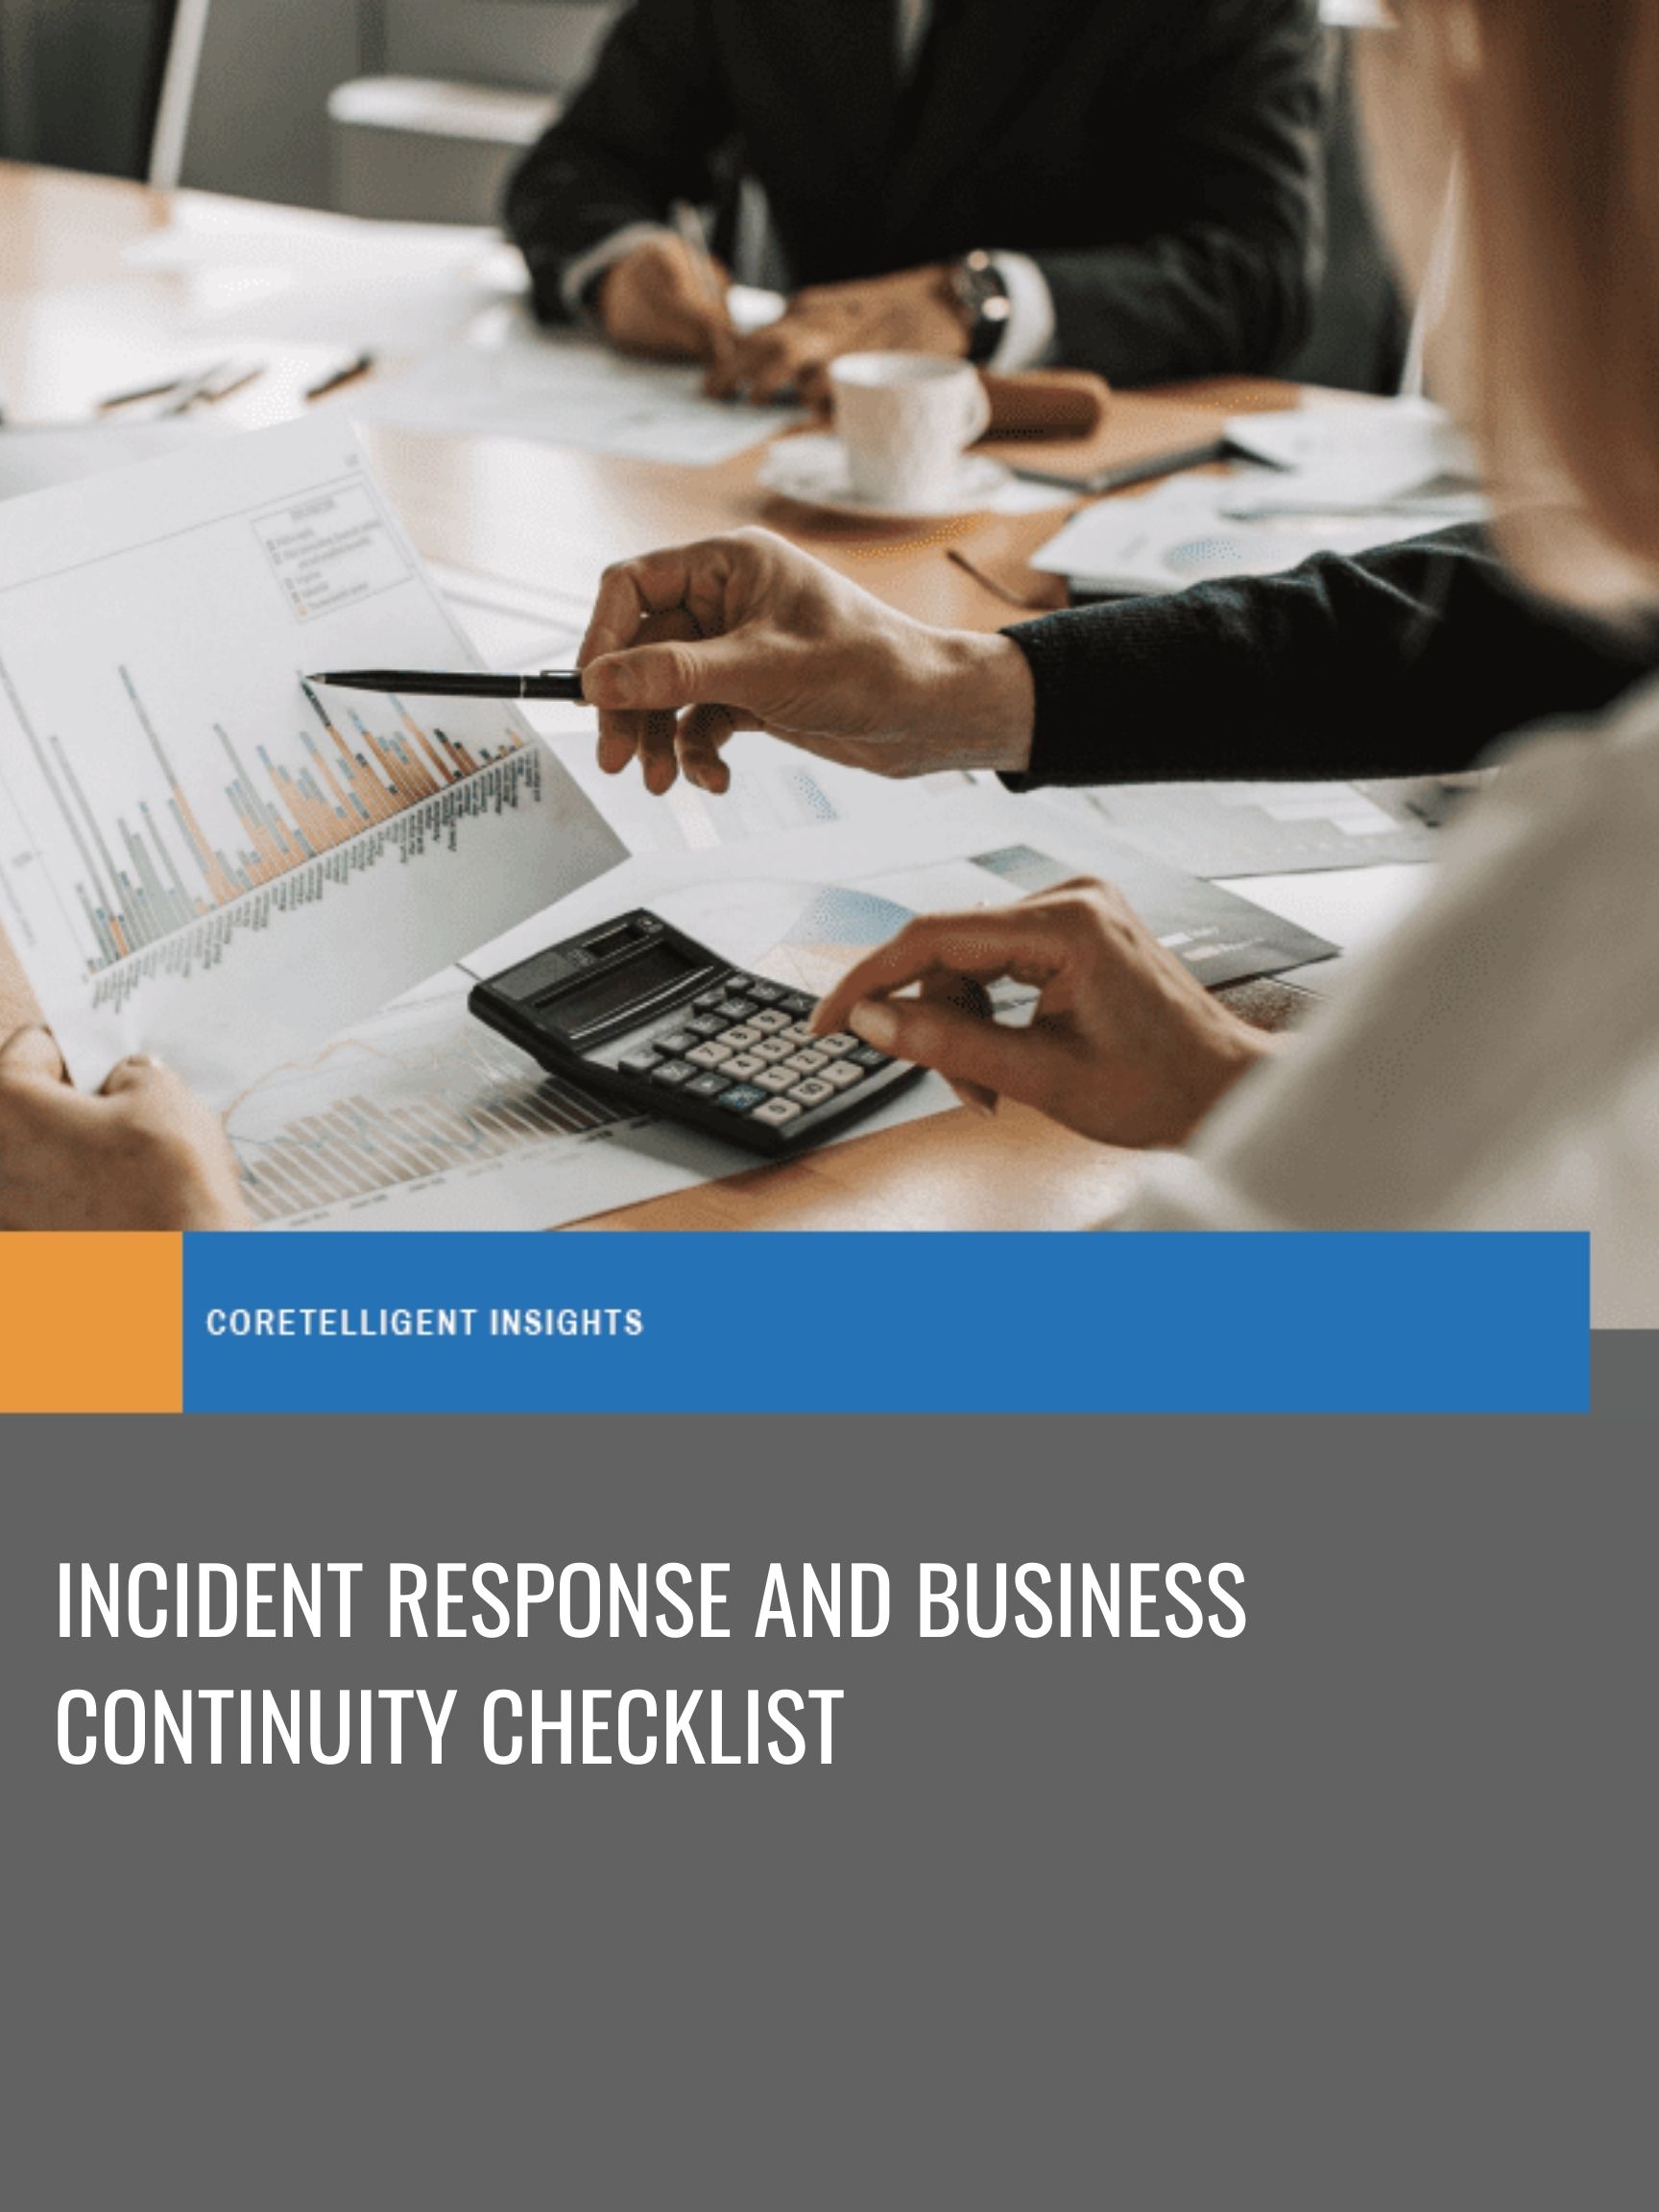 Incident Response and Business Continuity Checklist